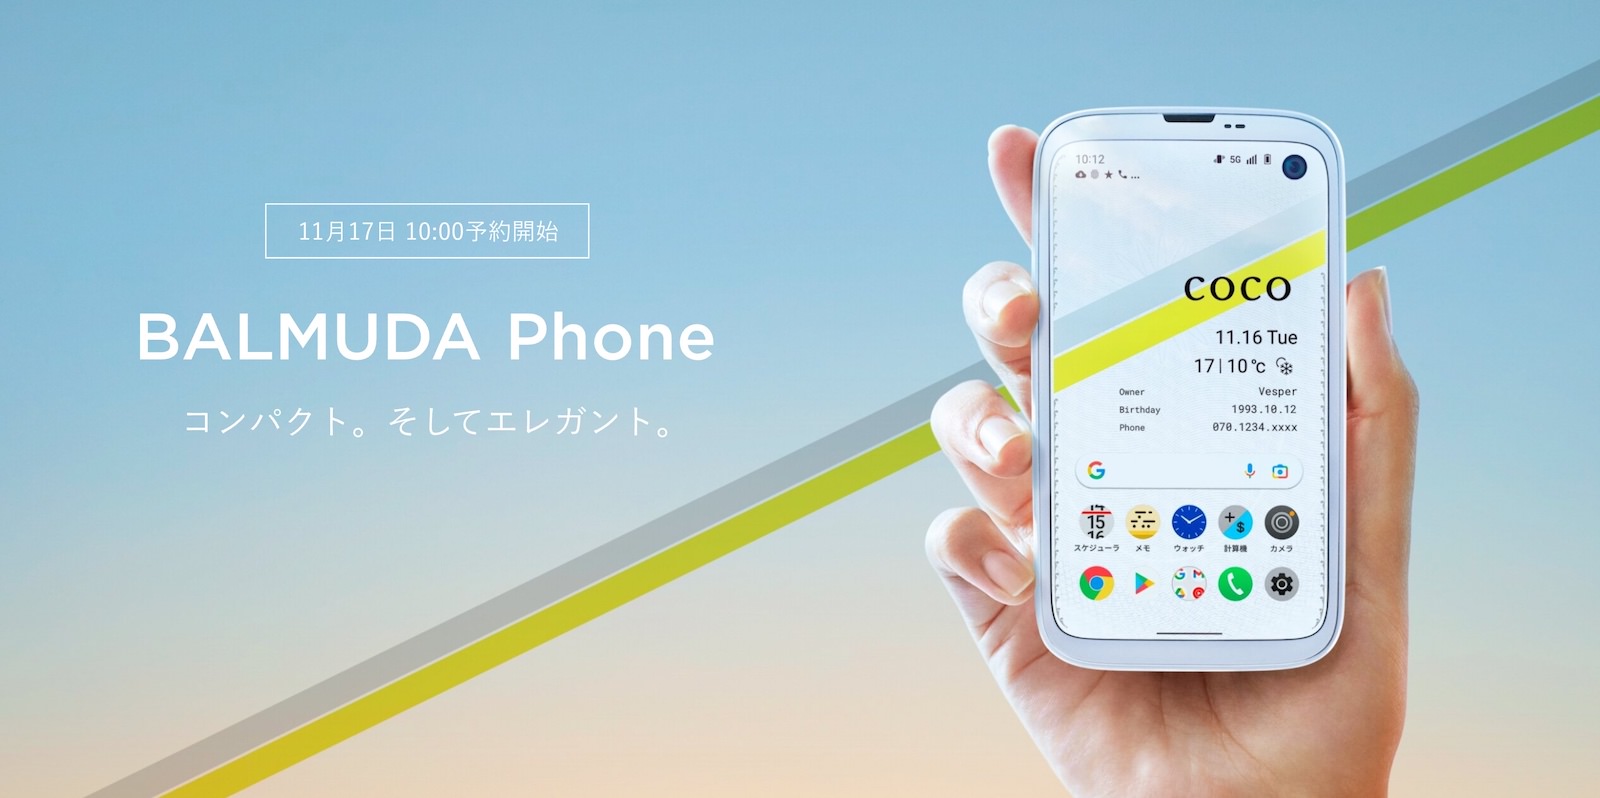 Blalmuda Phone Official Release